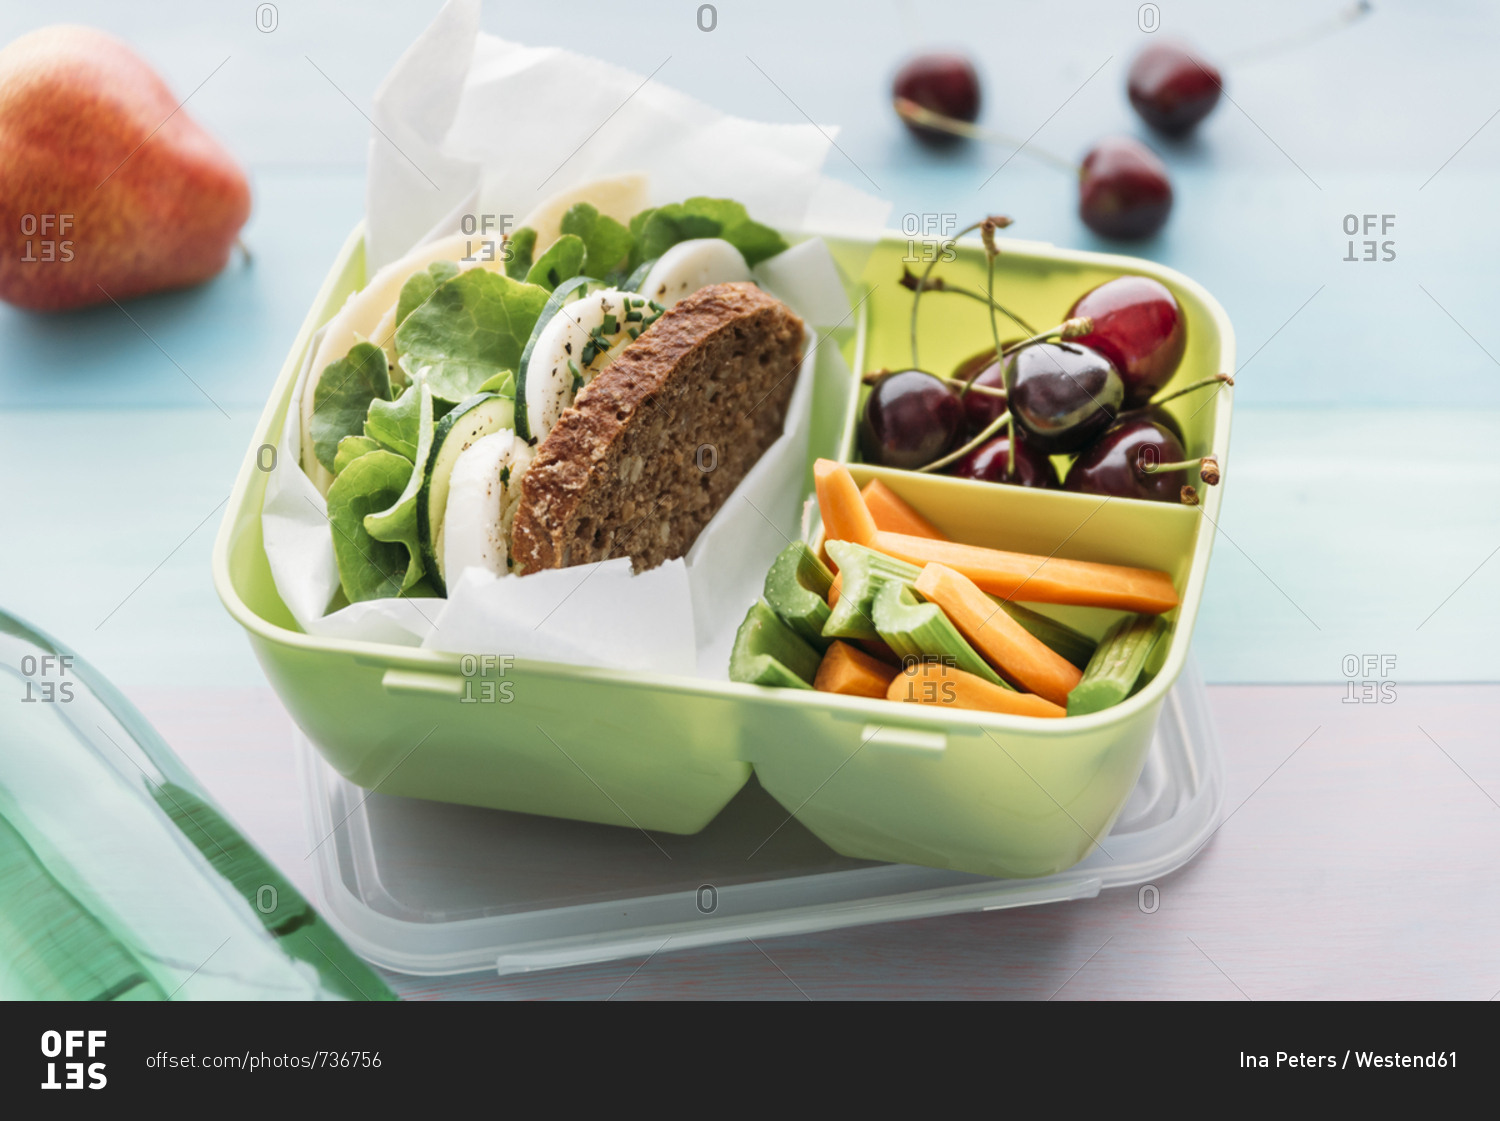 Healthy school food in a lunch box- vegetarian sandwich with cheese- lettuce- cucumber- egg and cress- sliced carrot and celery- cherries and pear